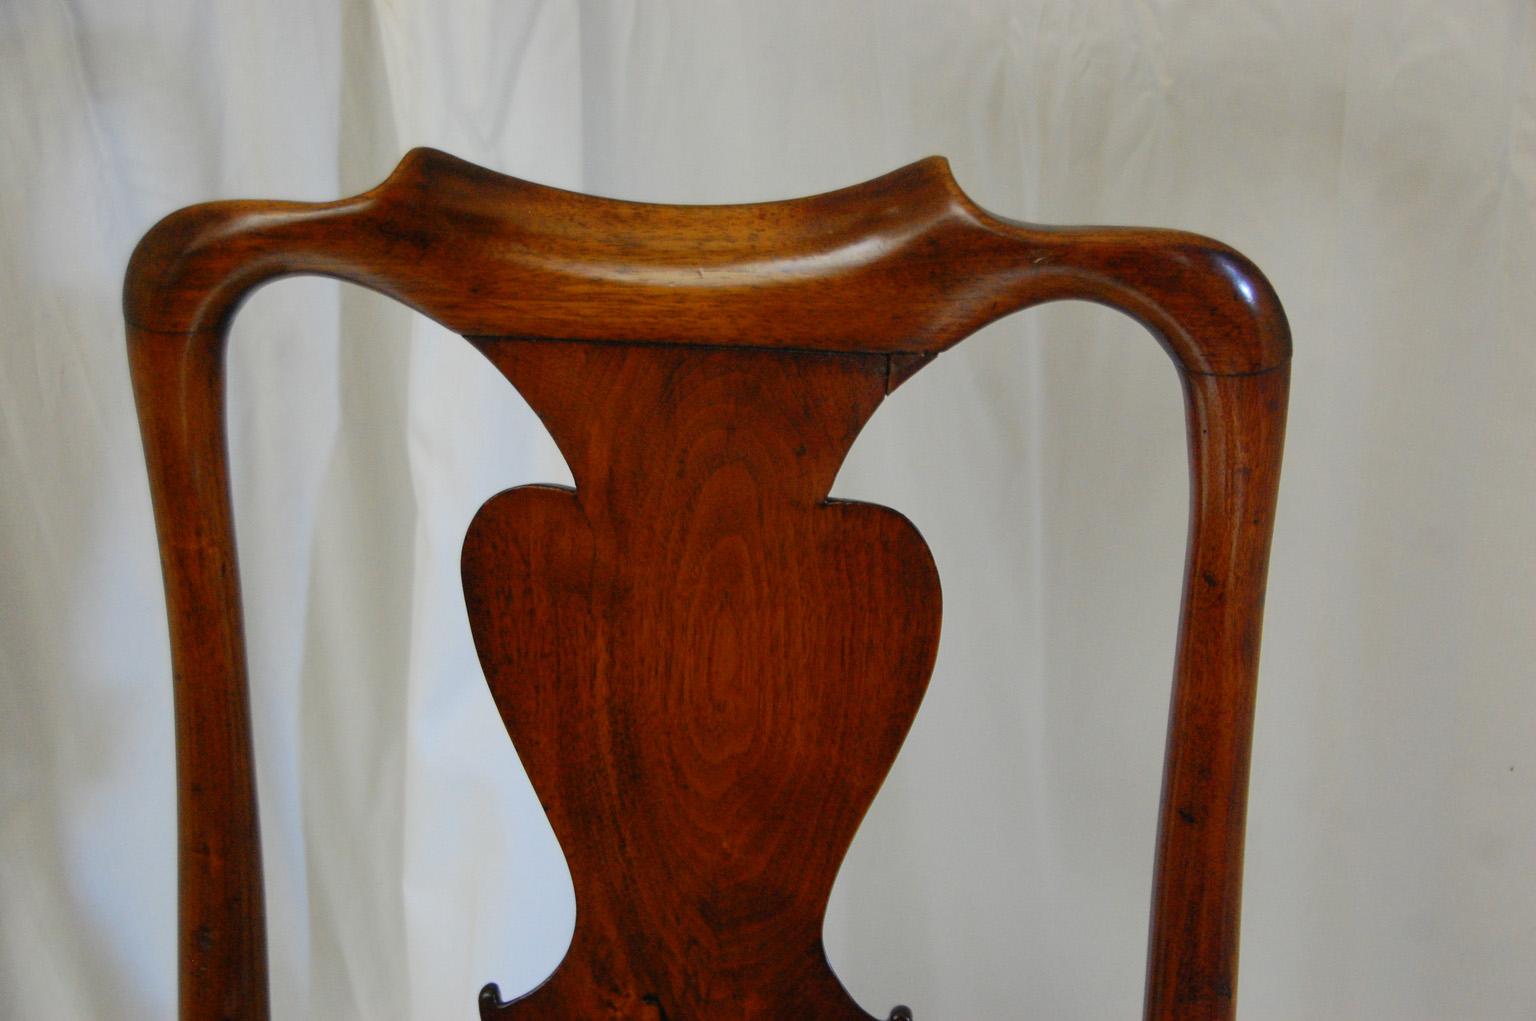 English Queen Anne walnut side chair with cabriole legs, pad front feet, turned stretcher connecting back legs, and slip seat. This elegant chair has a graceful curved tall back with handsome central solid walnut shaped splat. The timber was